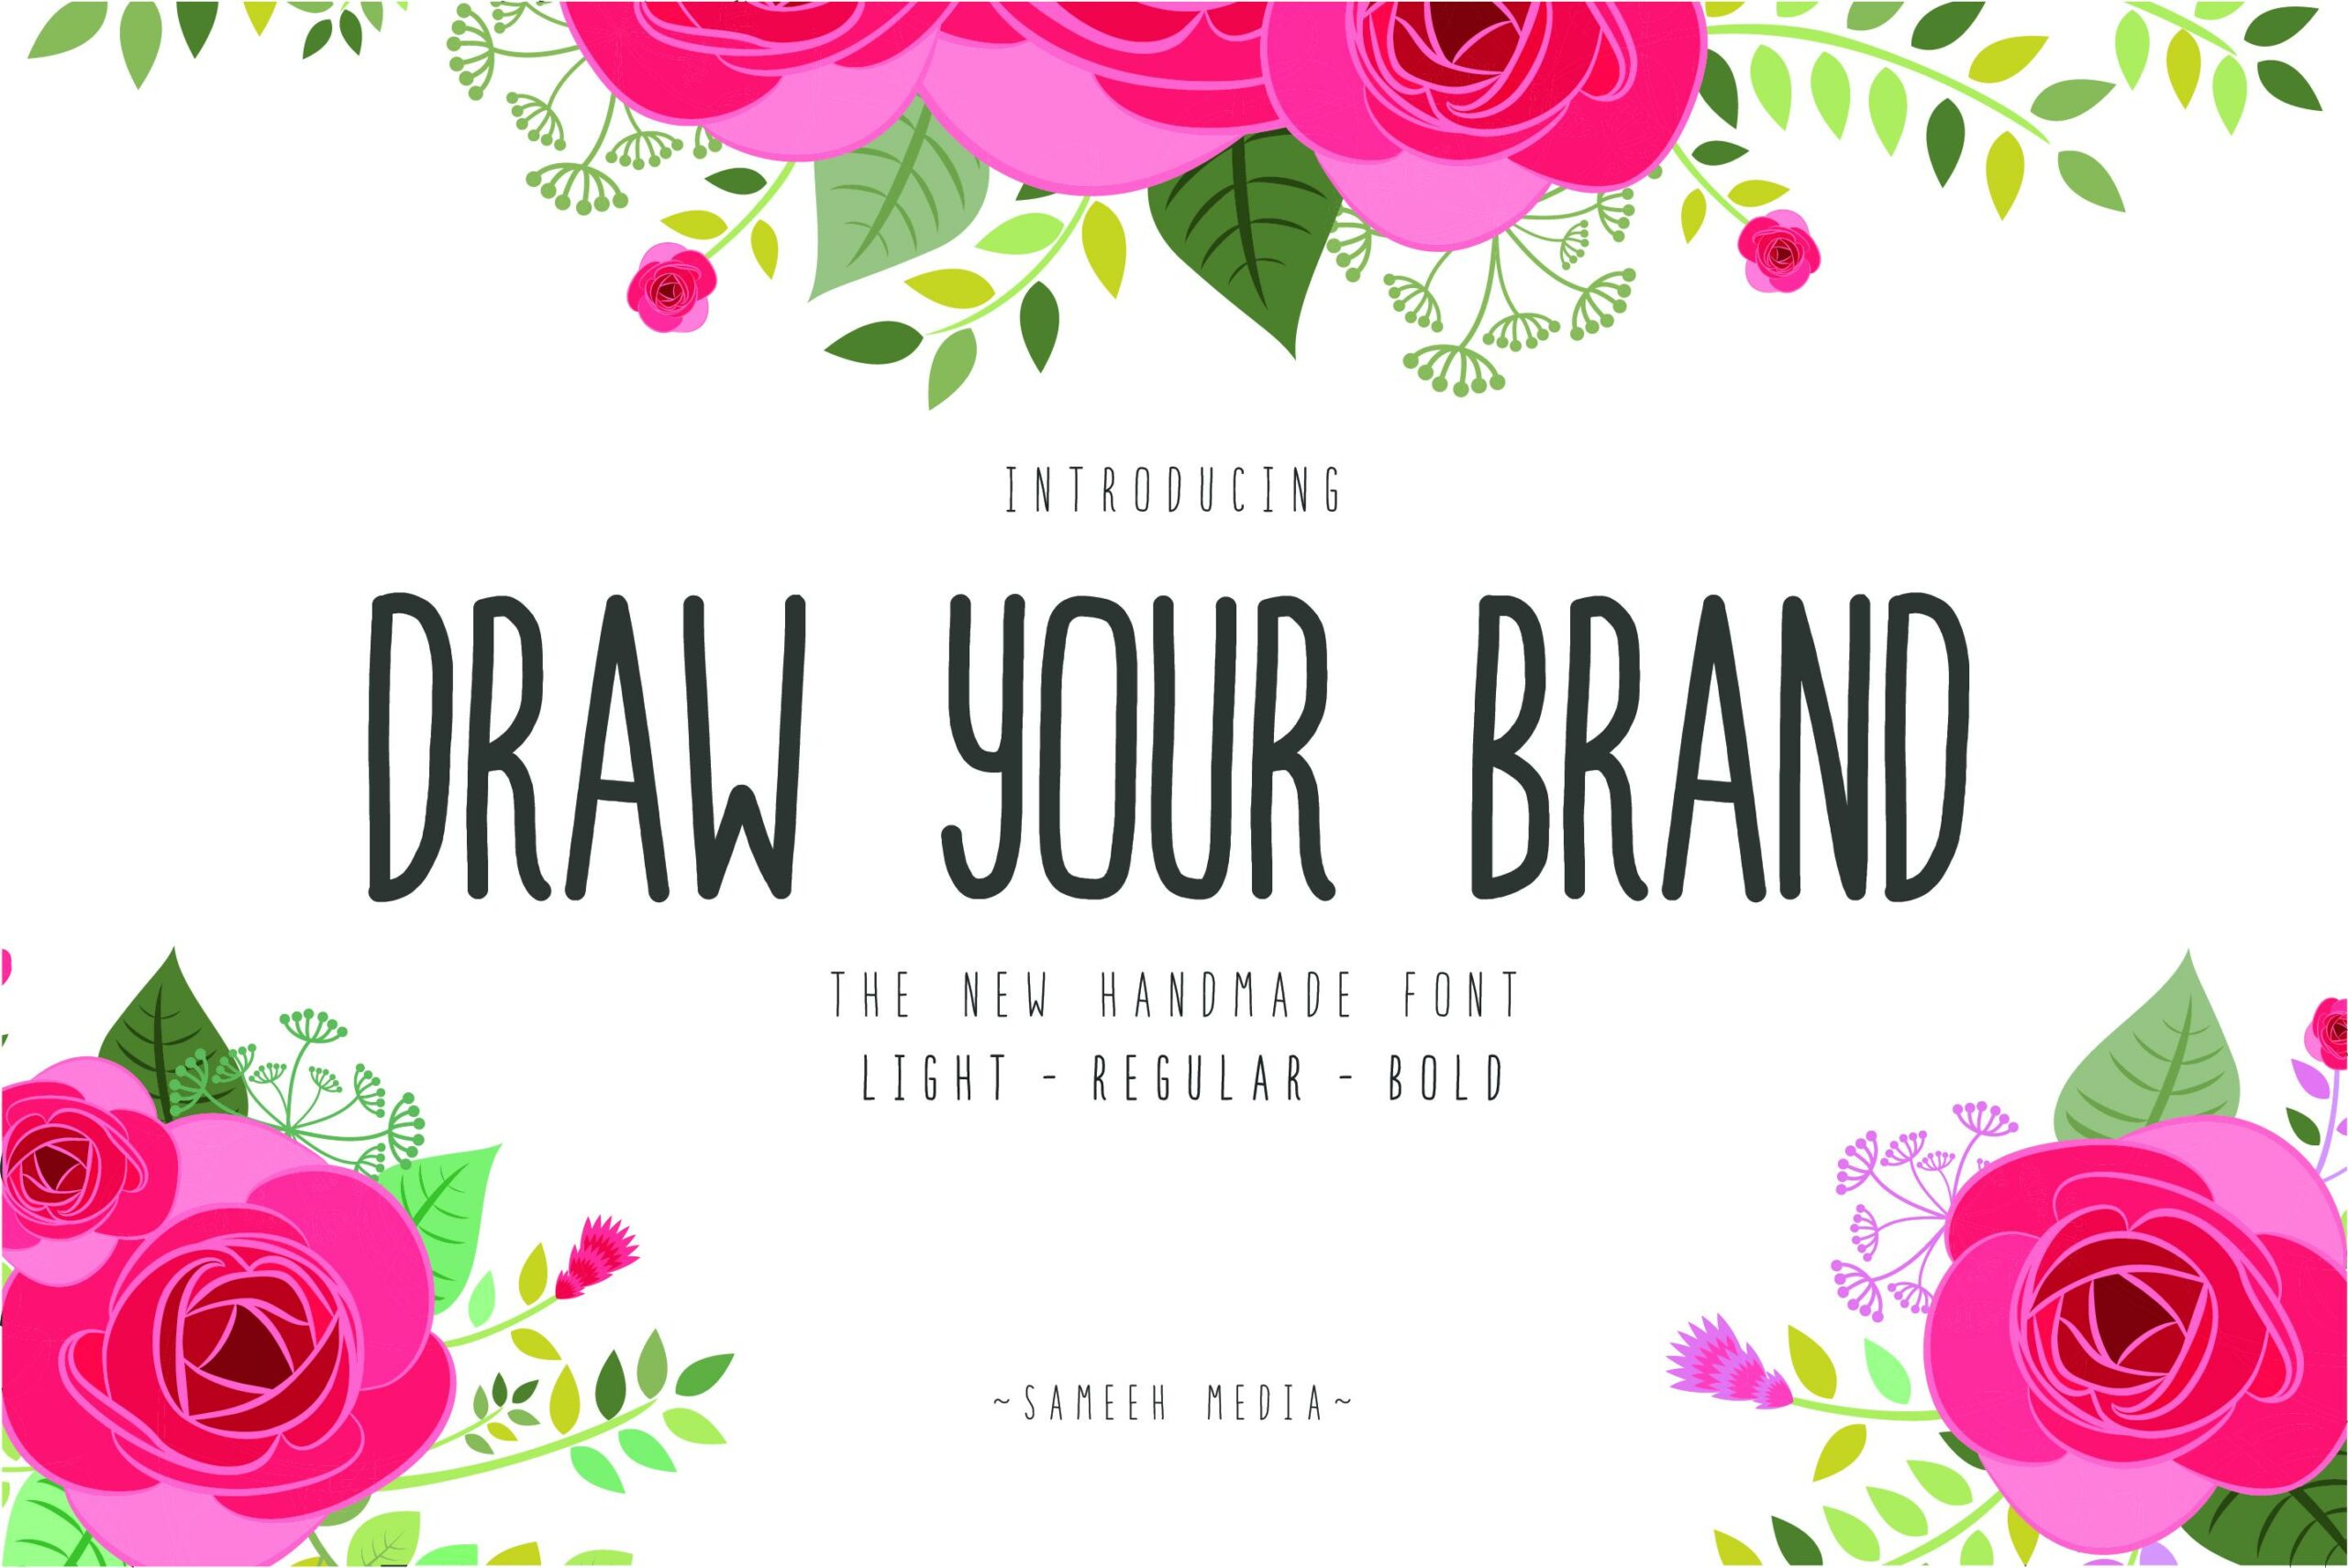 Draw Your Brand Handmade Font Poster 1